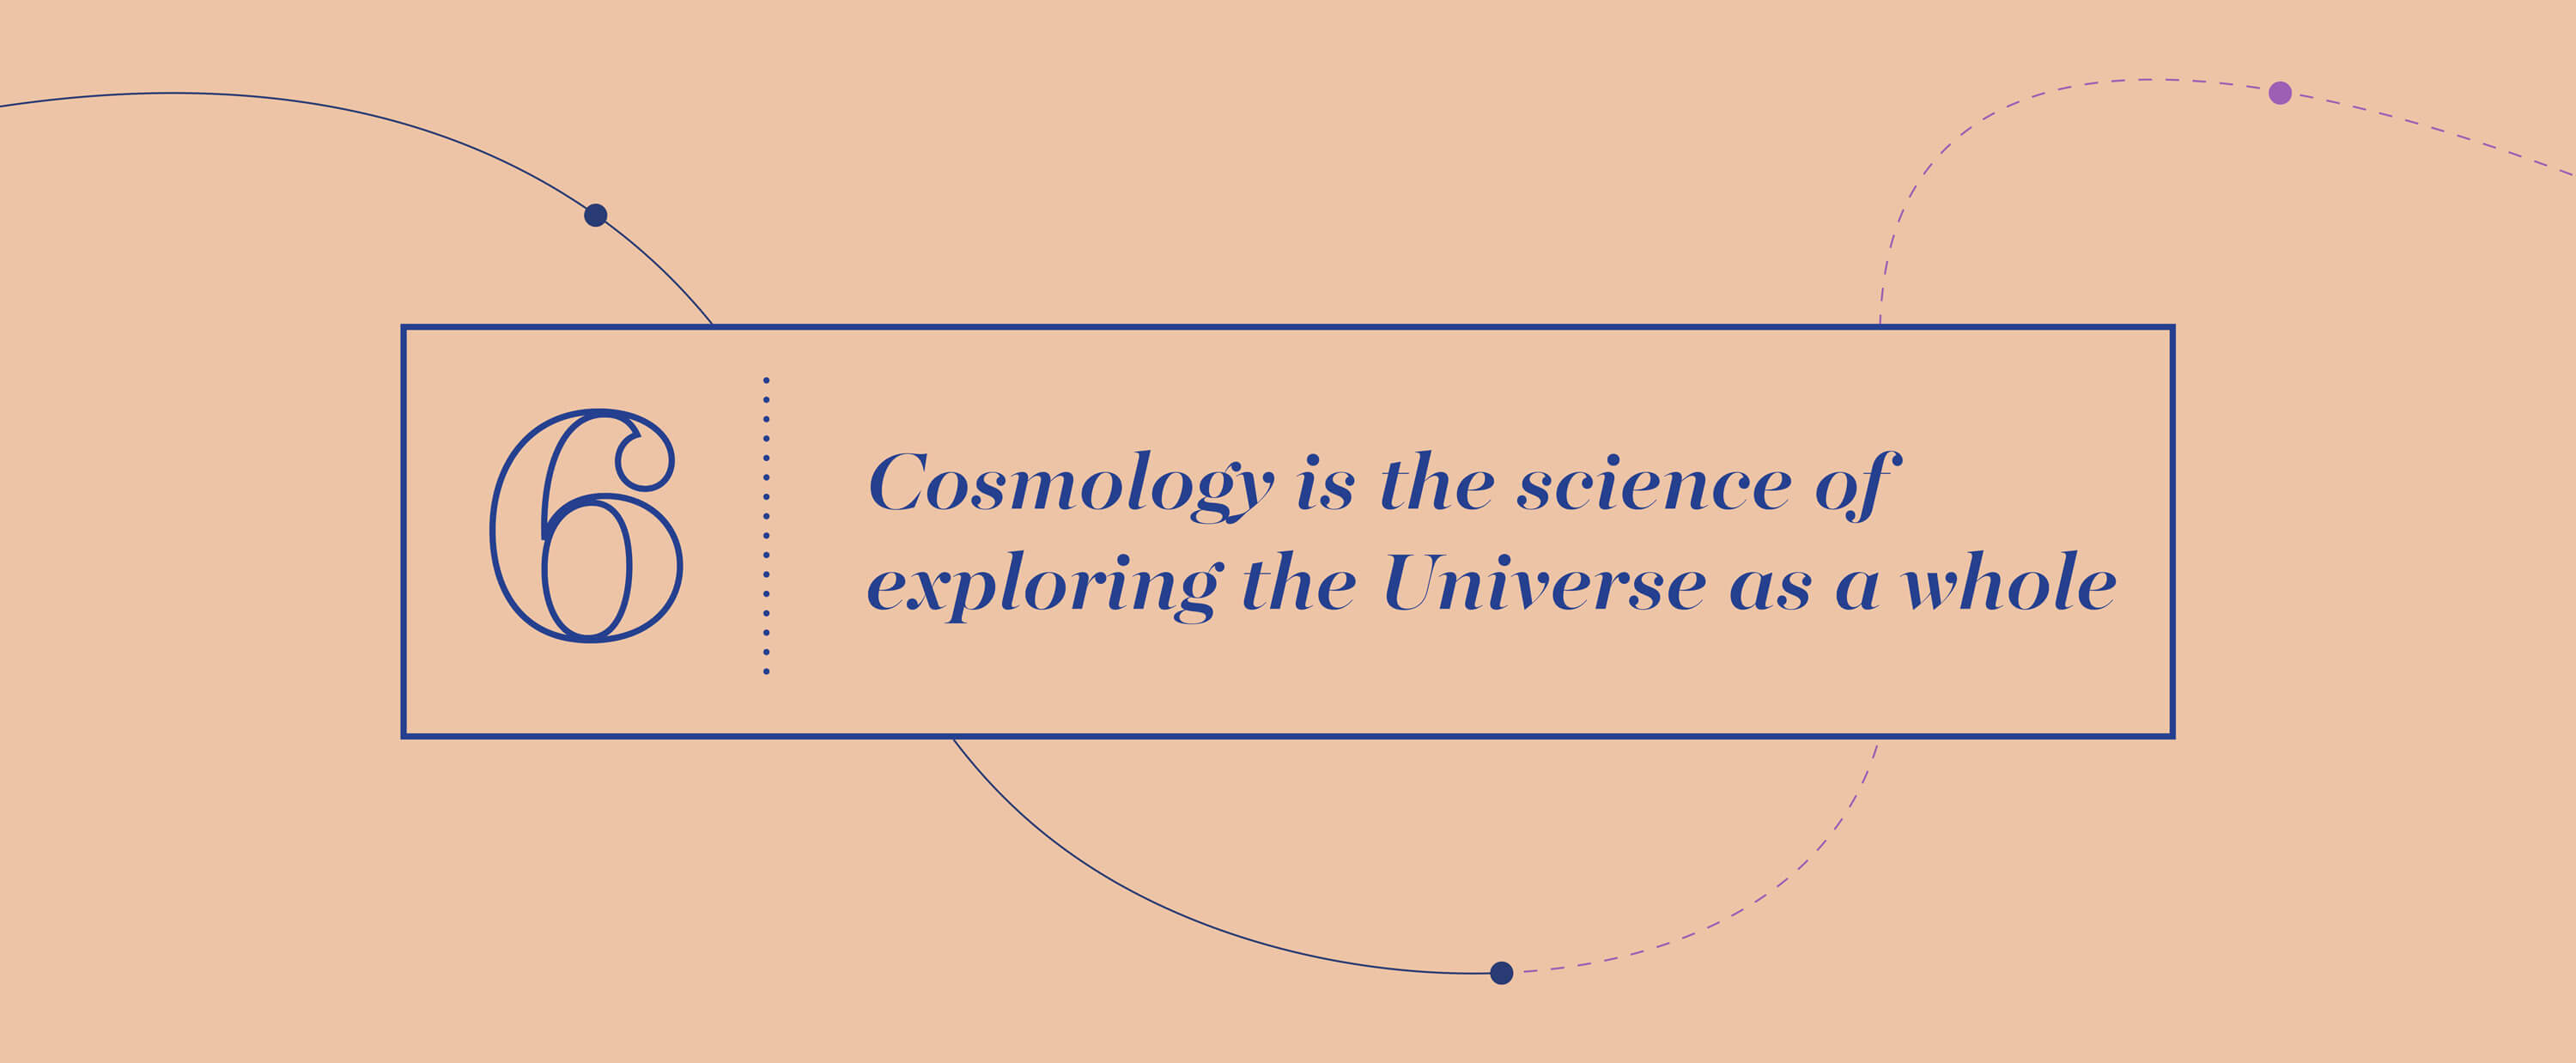 Big Idea 6 - Cosmology is the science of exploring the Universe as a whole